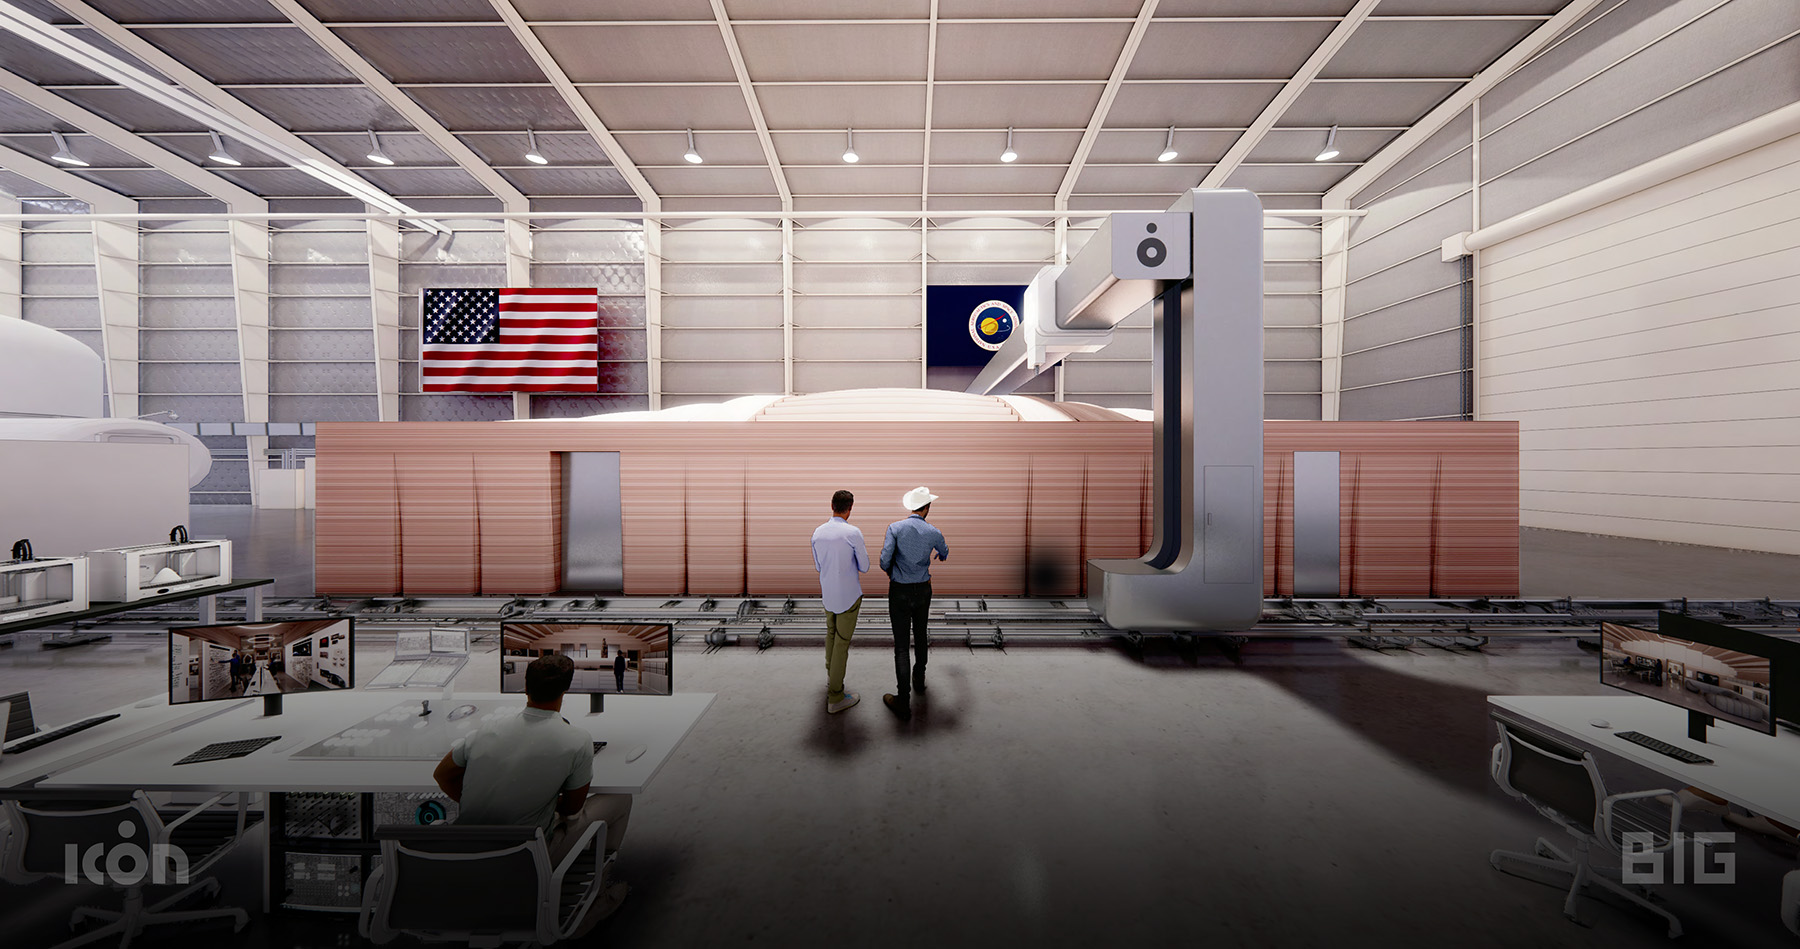 Rendering shows two men standing in front of an indoor, 3D-printed structure. The printer can be seen on the right side. 